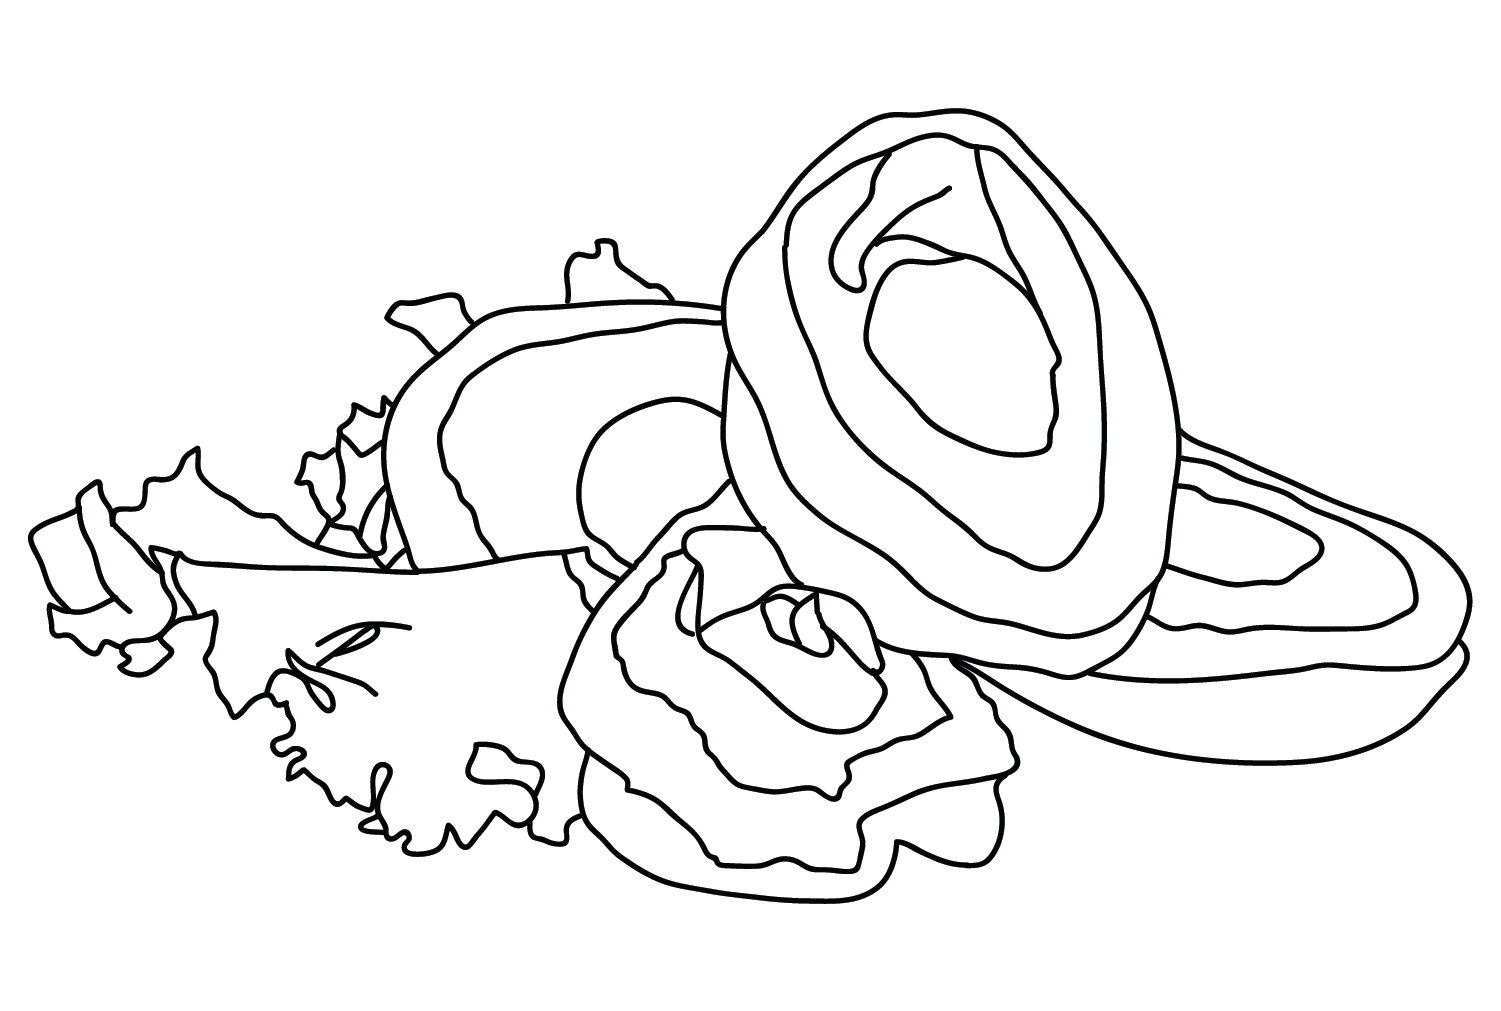 Abalone Drawing Coloring Page from Abalone